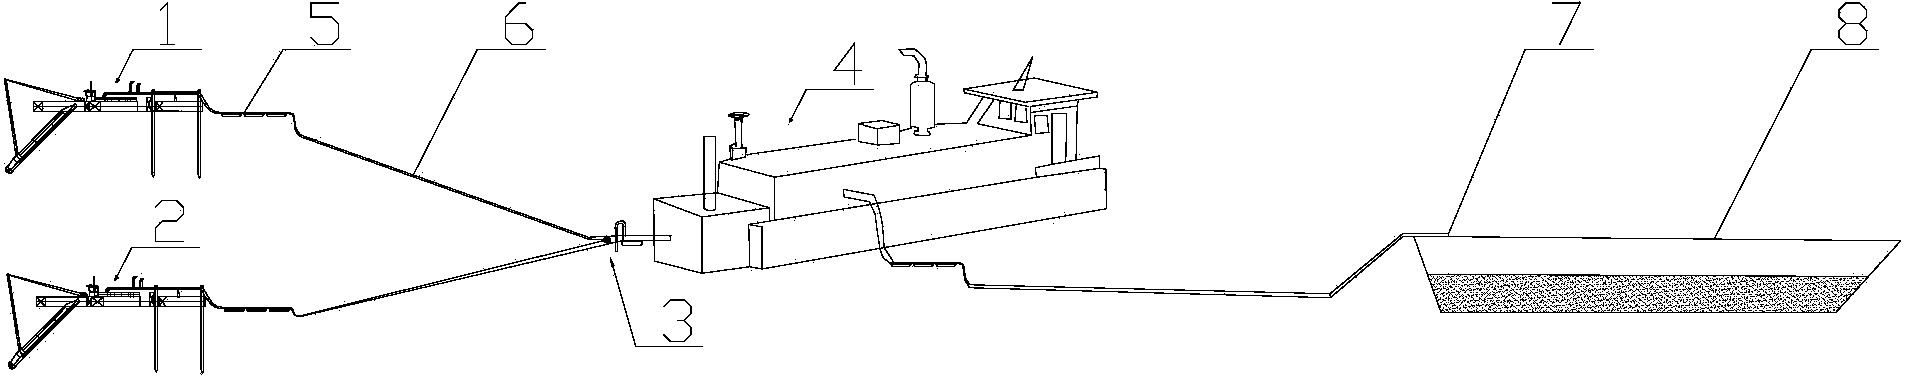 Small-size cutter-suction boat and pump boat two-parallel and one-series blow filing system and construction method of small-size cutter-suction boat and pump boat two-parallel and one-series blow filing system